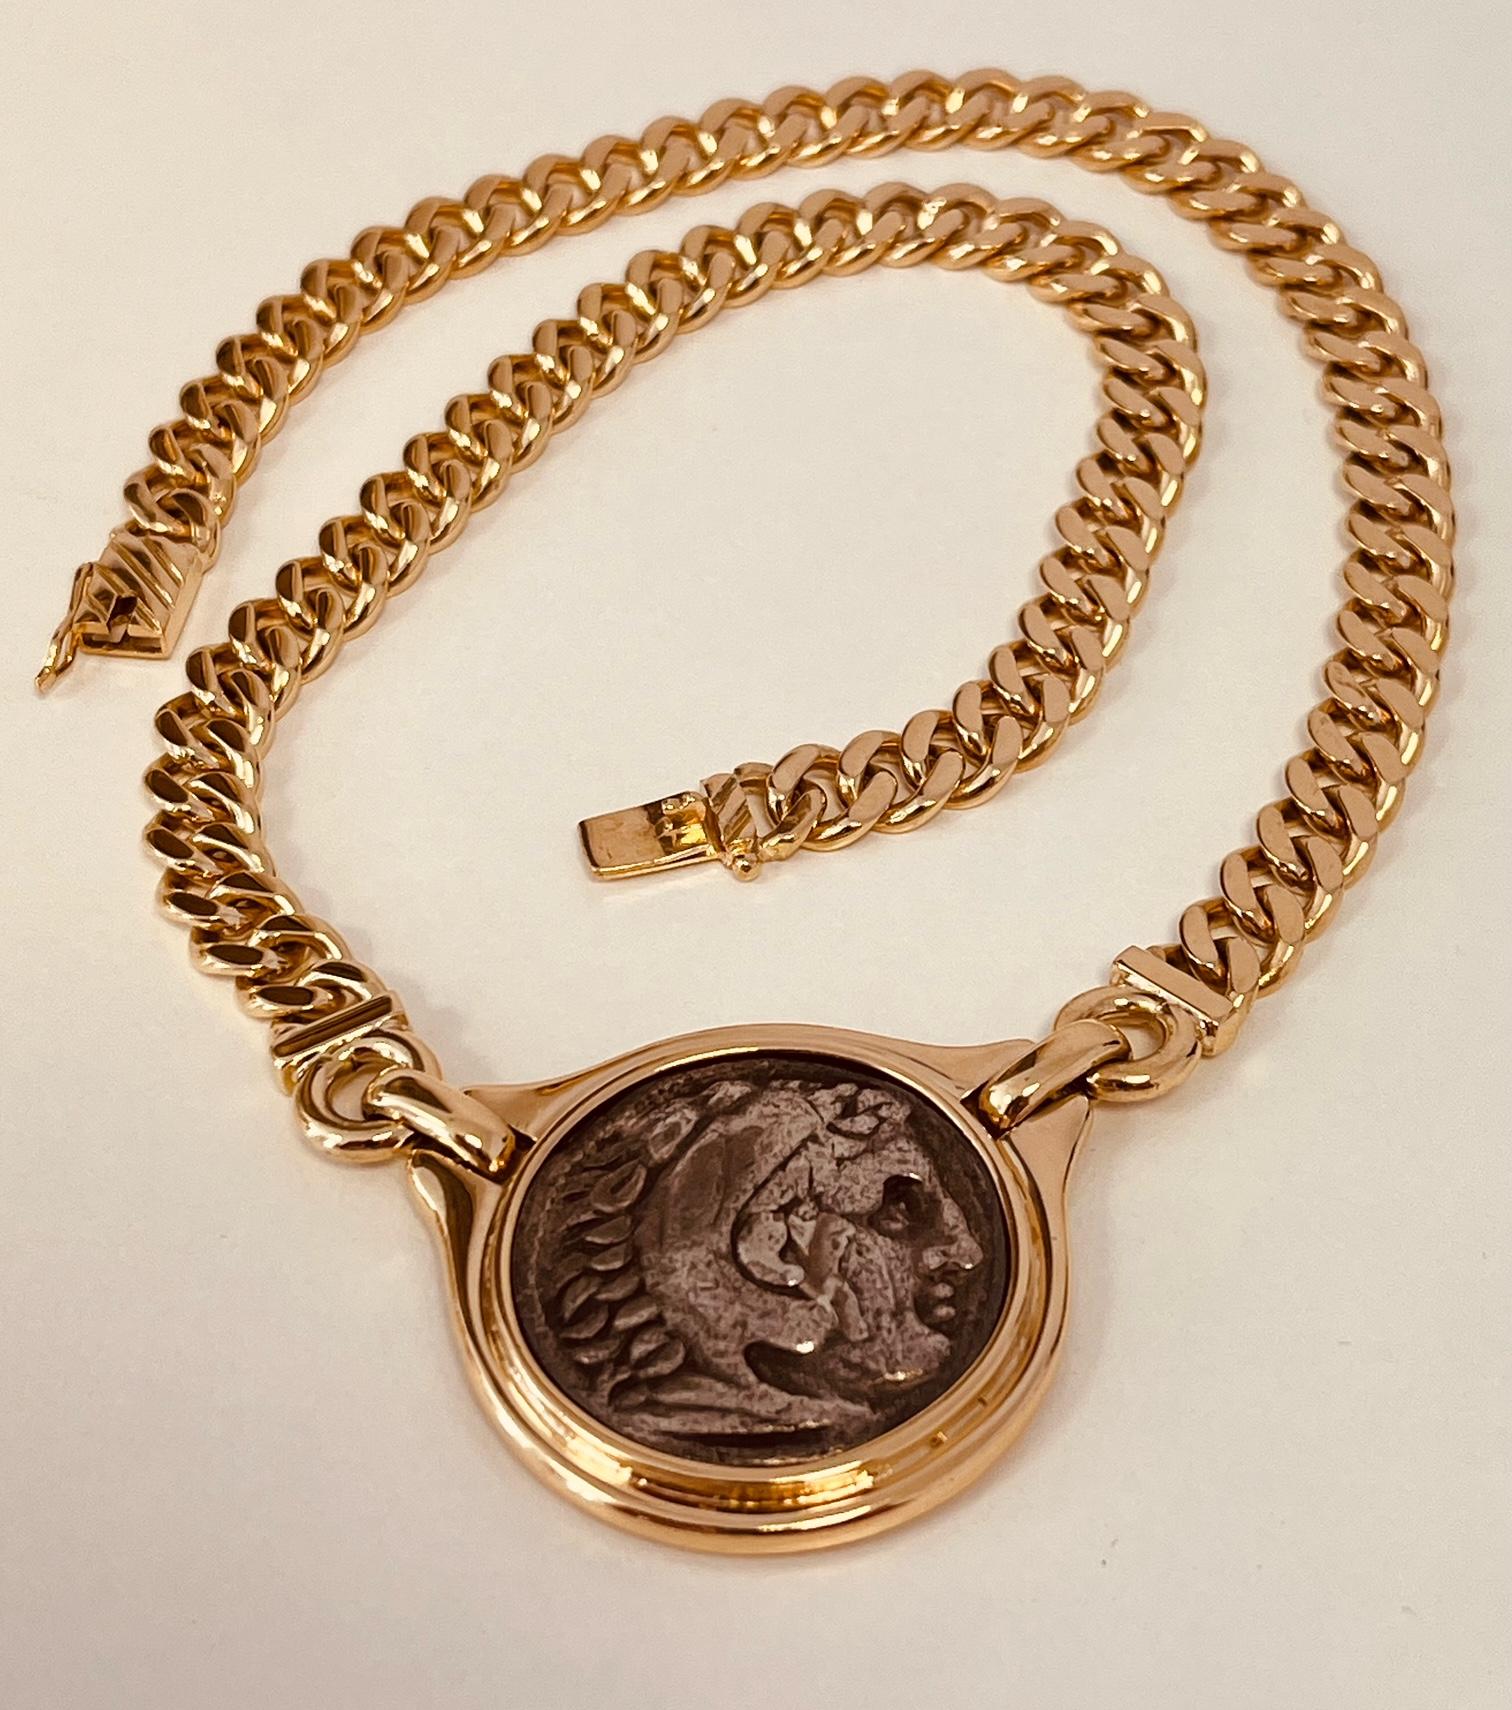 A 18ct gold graduated curb link necklace centring a reproduction of an antique Alexander The Great silver coin. This coin was made using an ancient Greek technique. Circa 1980s. 29cm length. Weight: 76 grams. Stamped 750 to the tongue. Price: